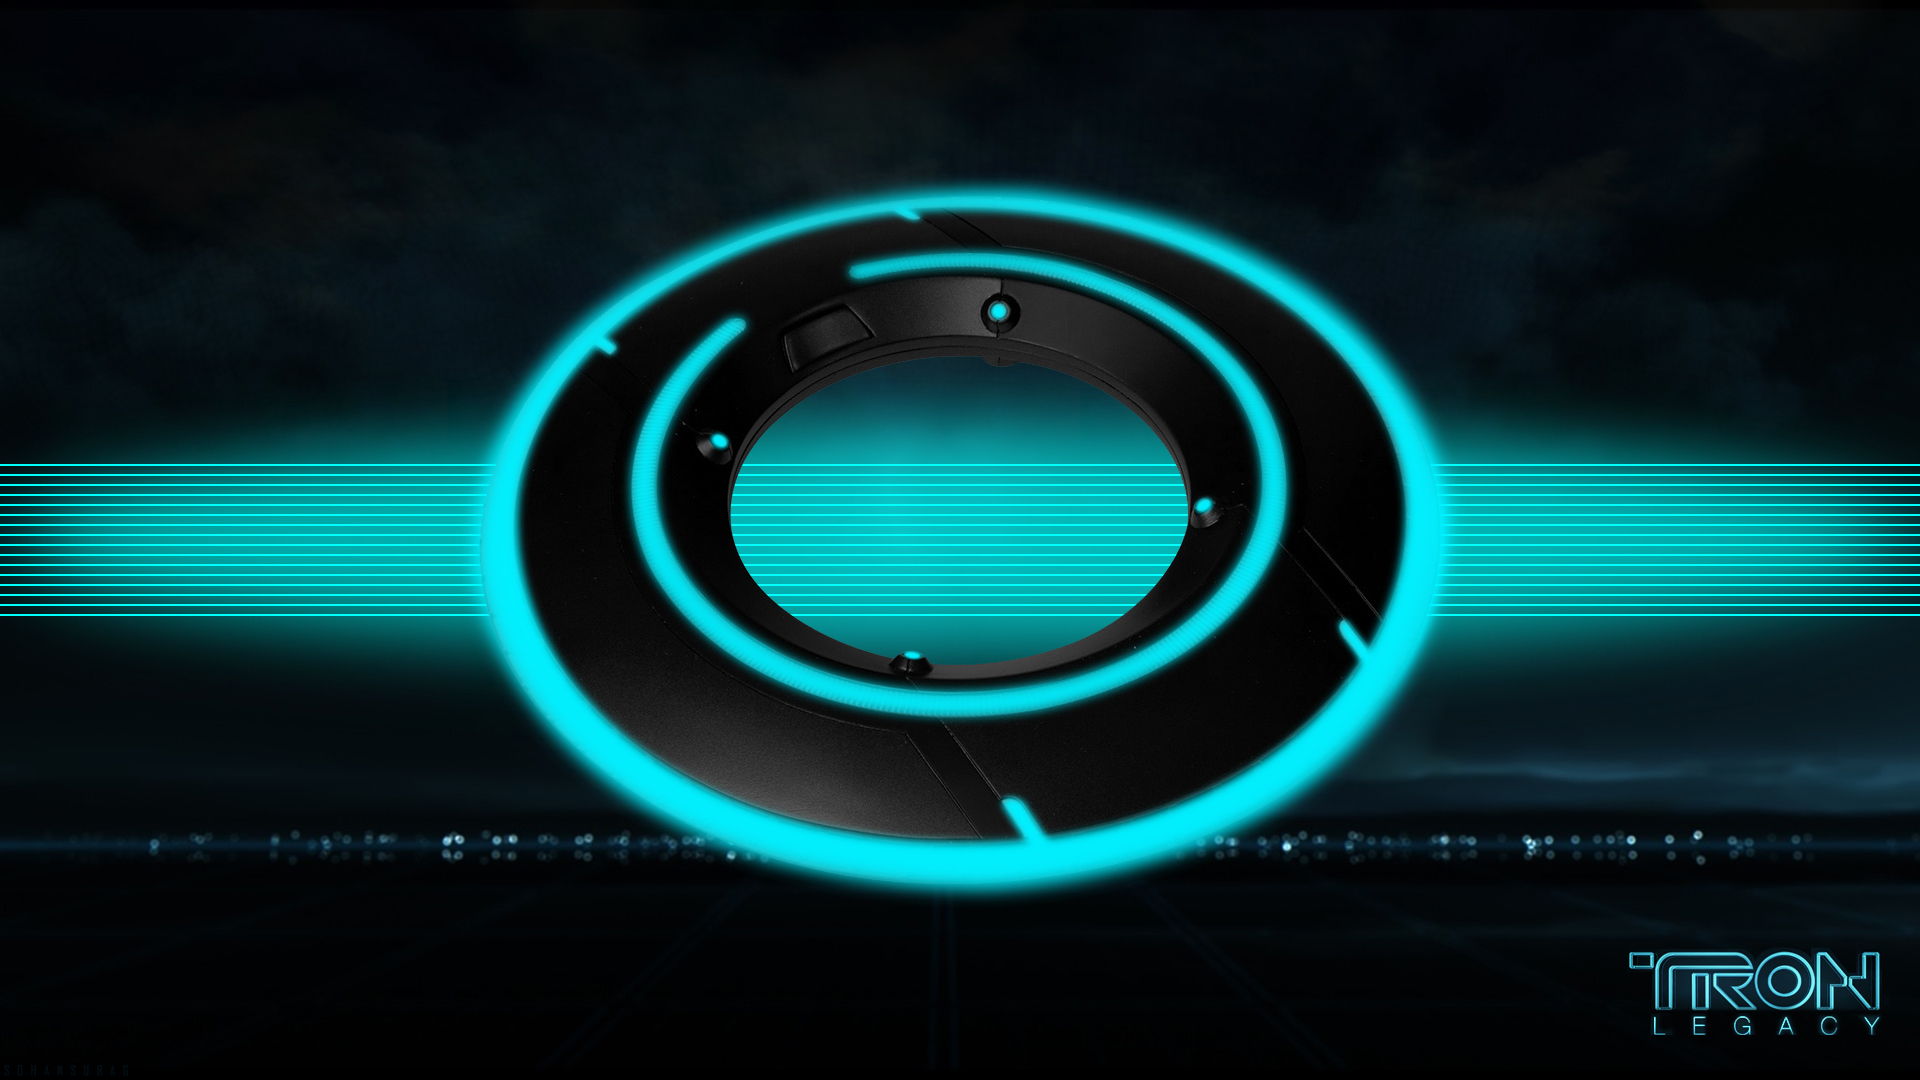 tron legacy wallpapers Awesome Wallpapers 1920x1080